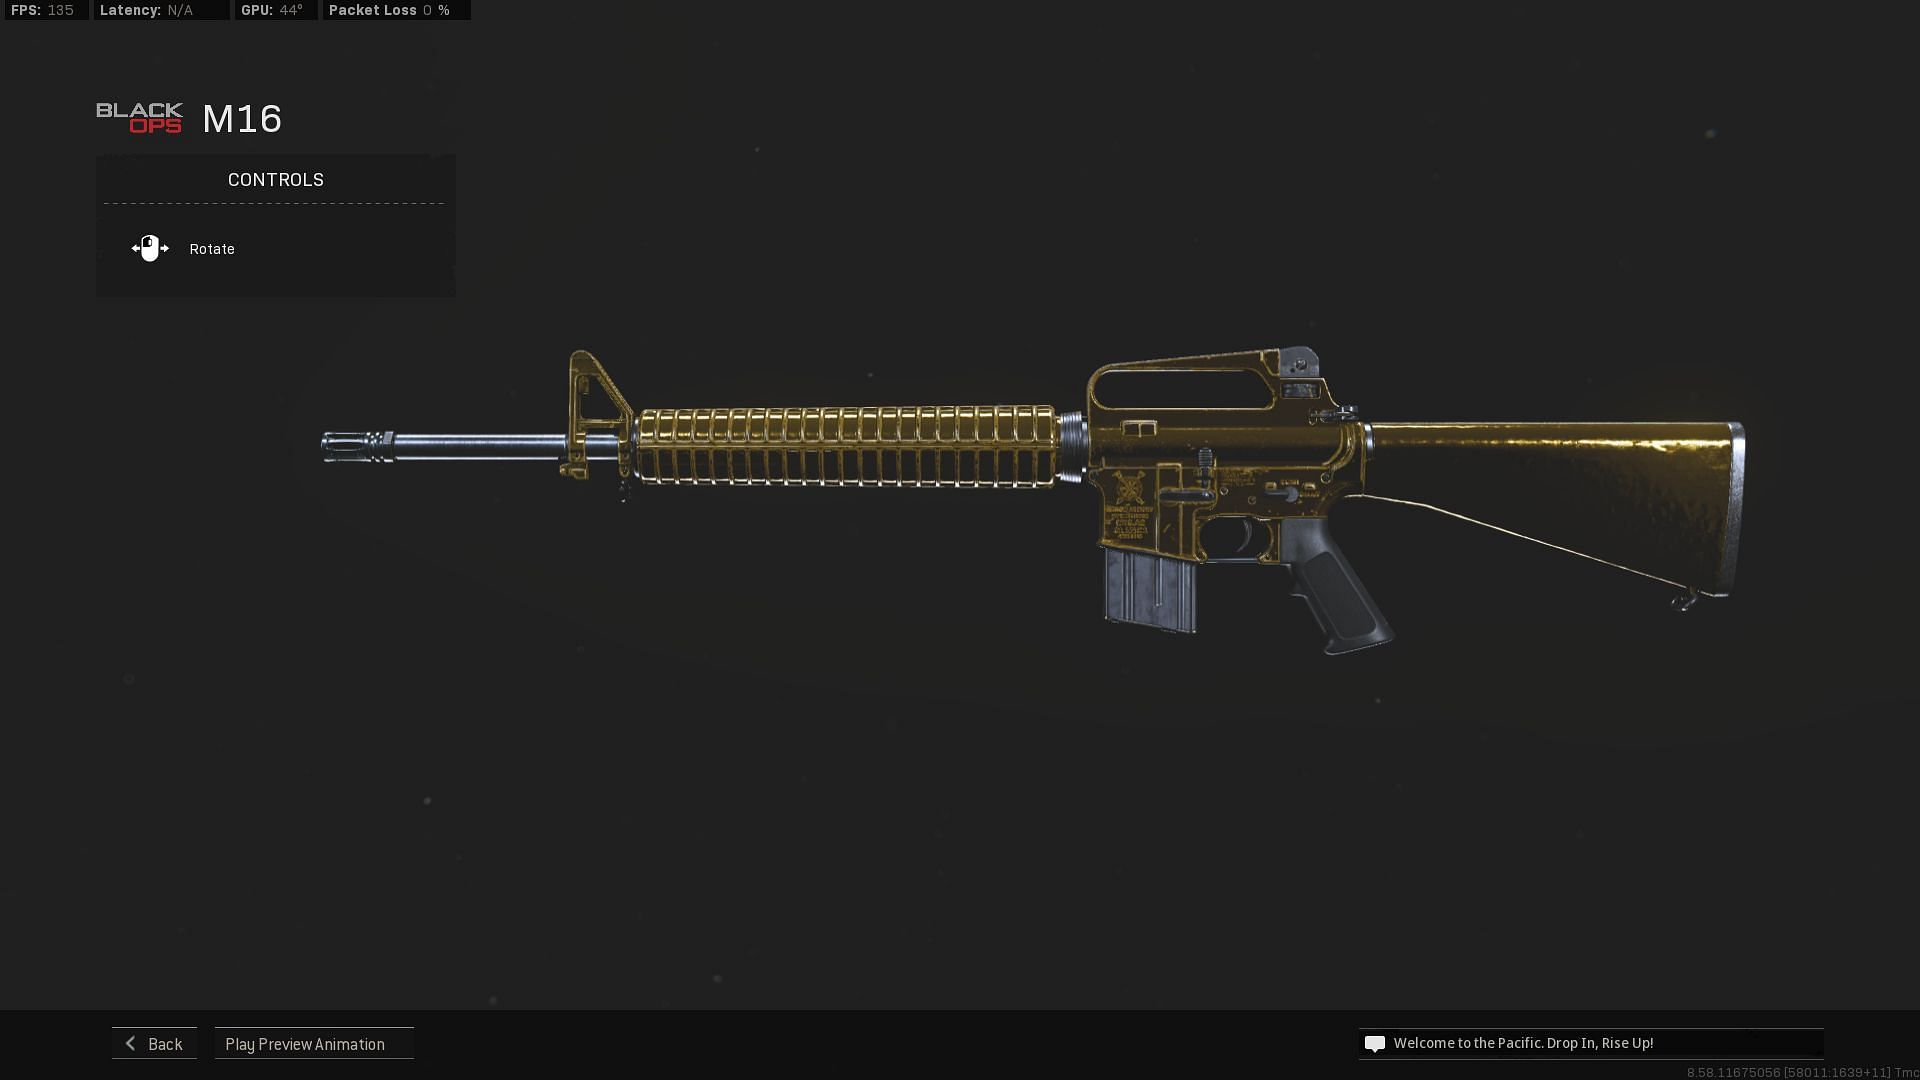 The M16 with gold camo in Call of Duty (Image via Activision)